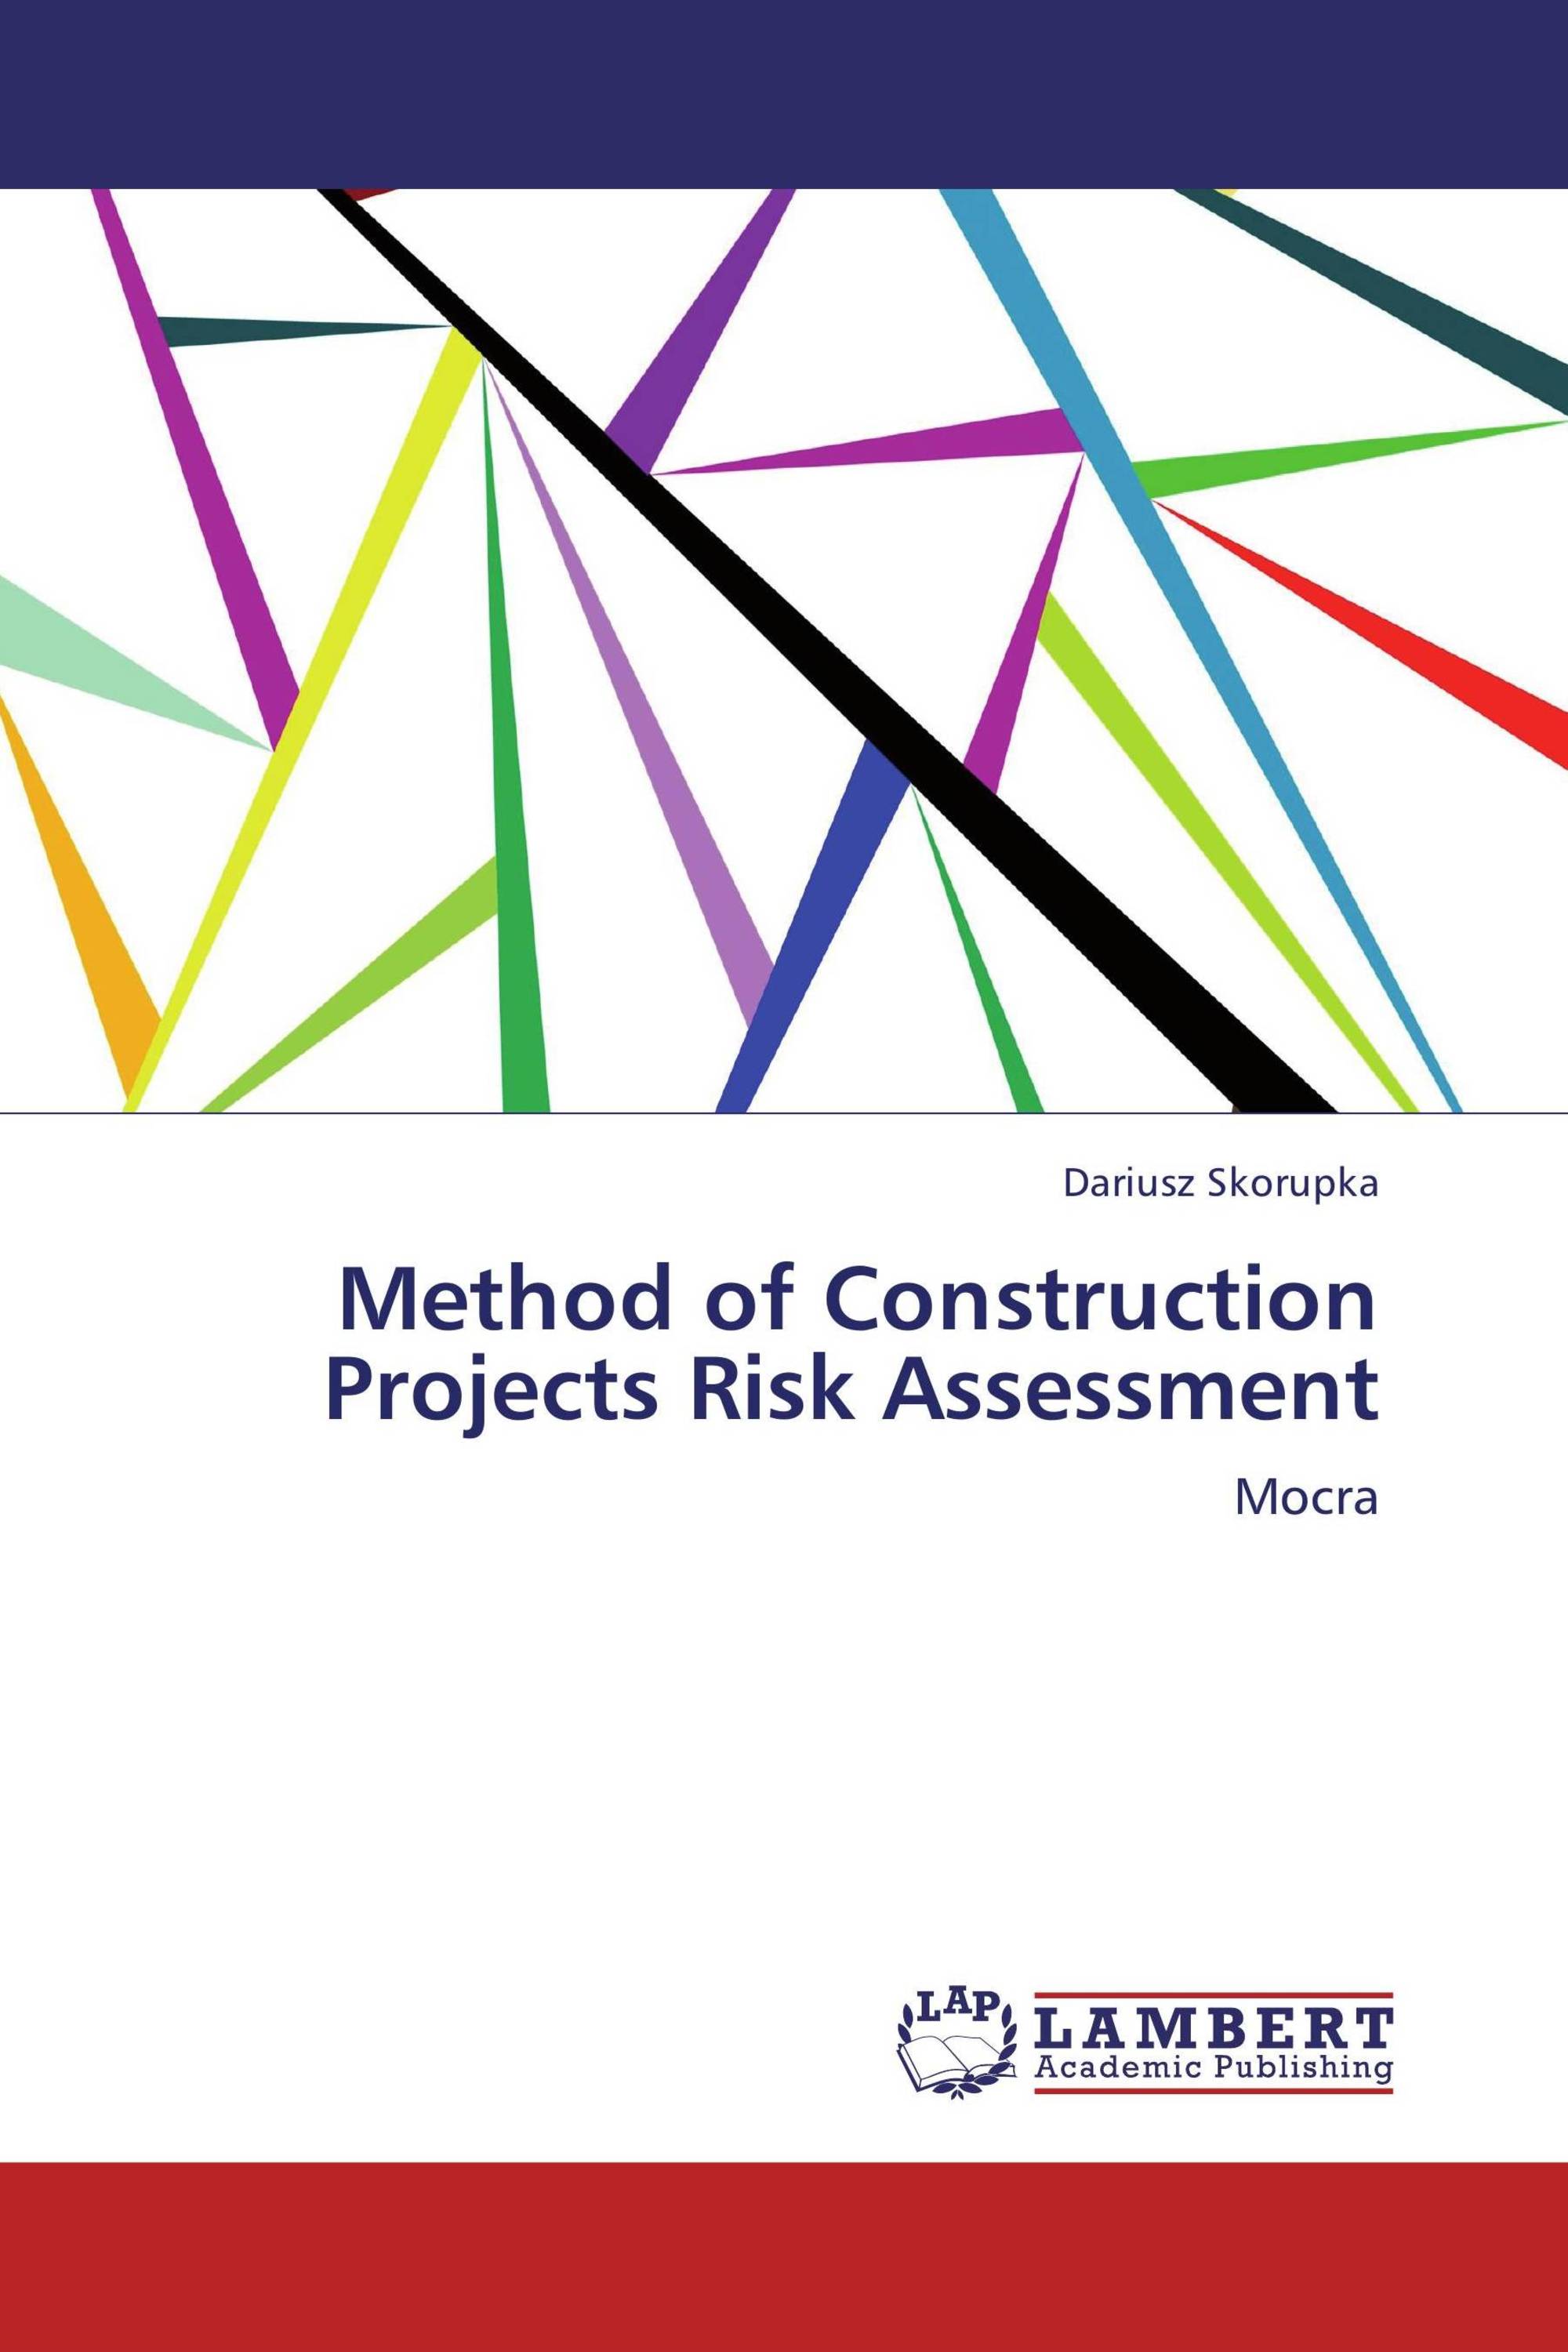 risk assessment and management in construction projects full thesis pdf